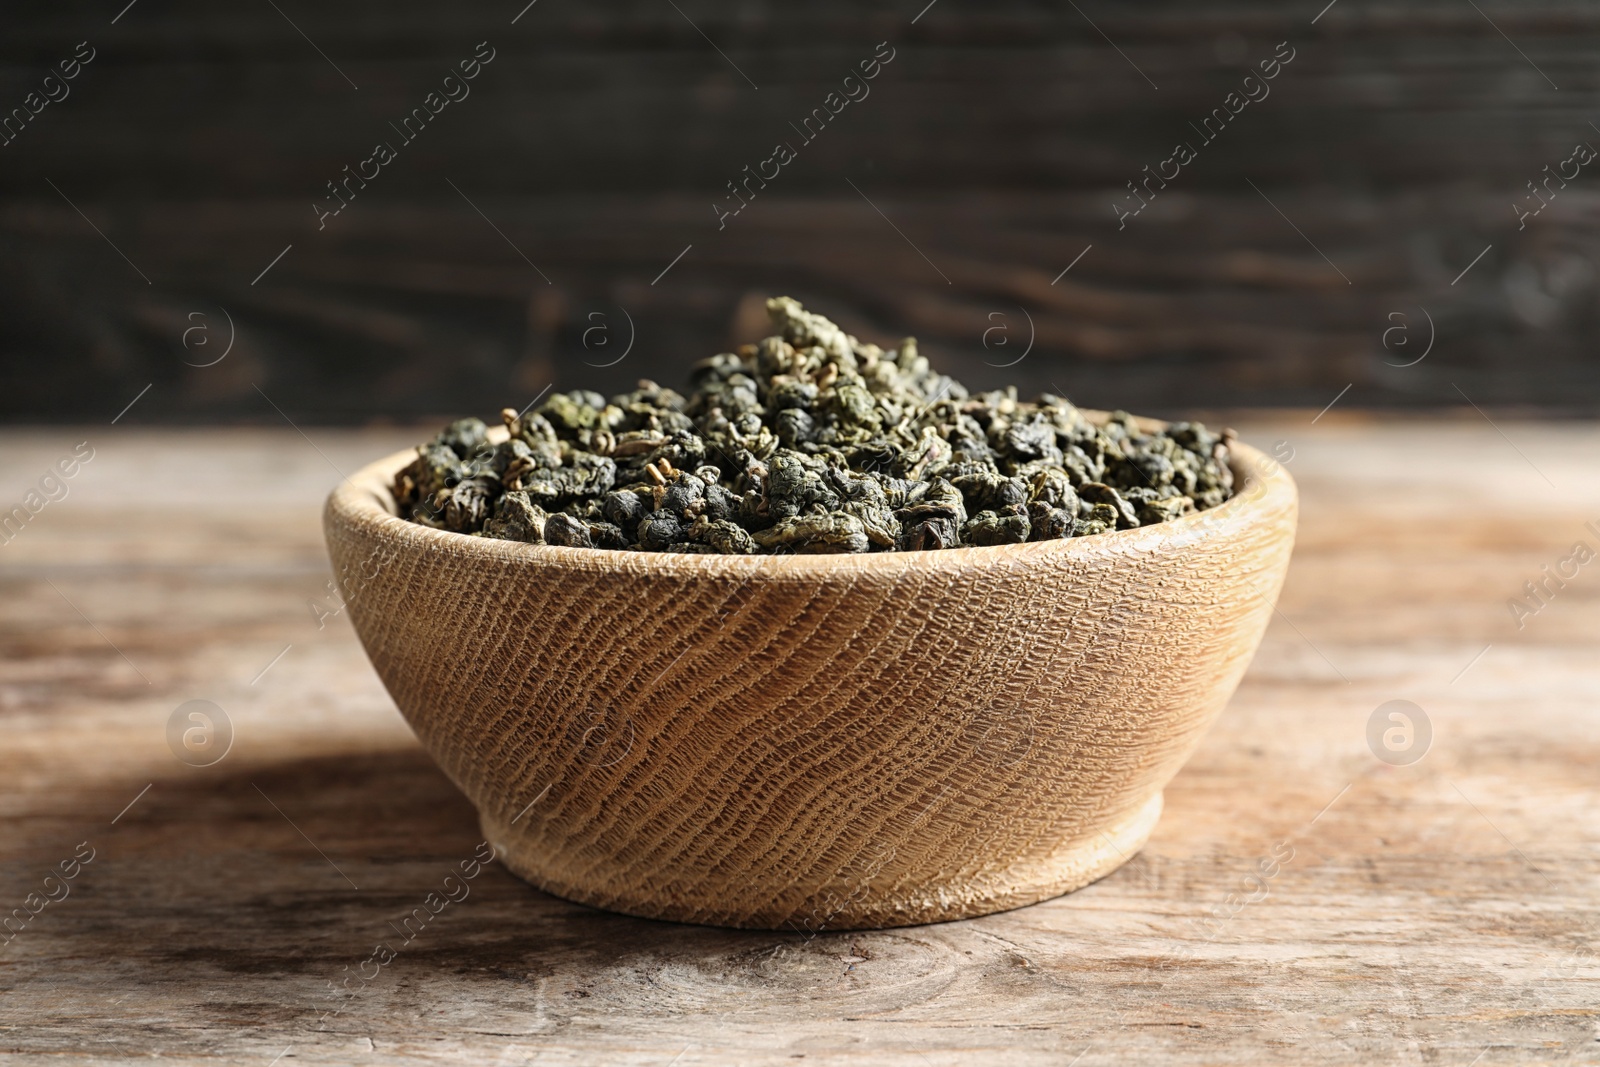 Photo of Bowl of Tie Guan Yin oolong tea leaves on table